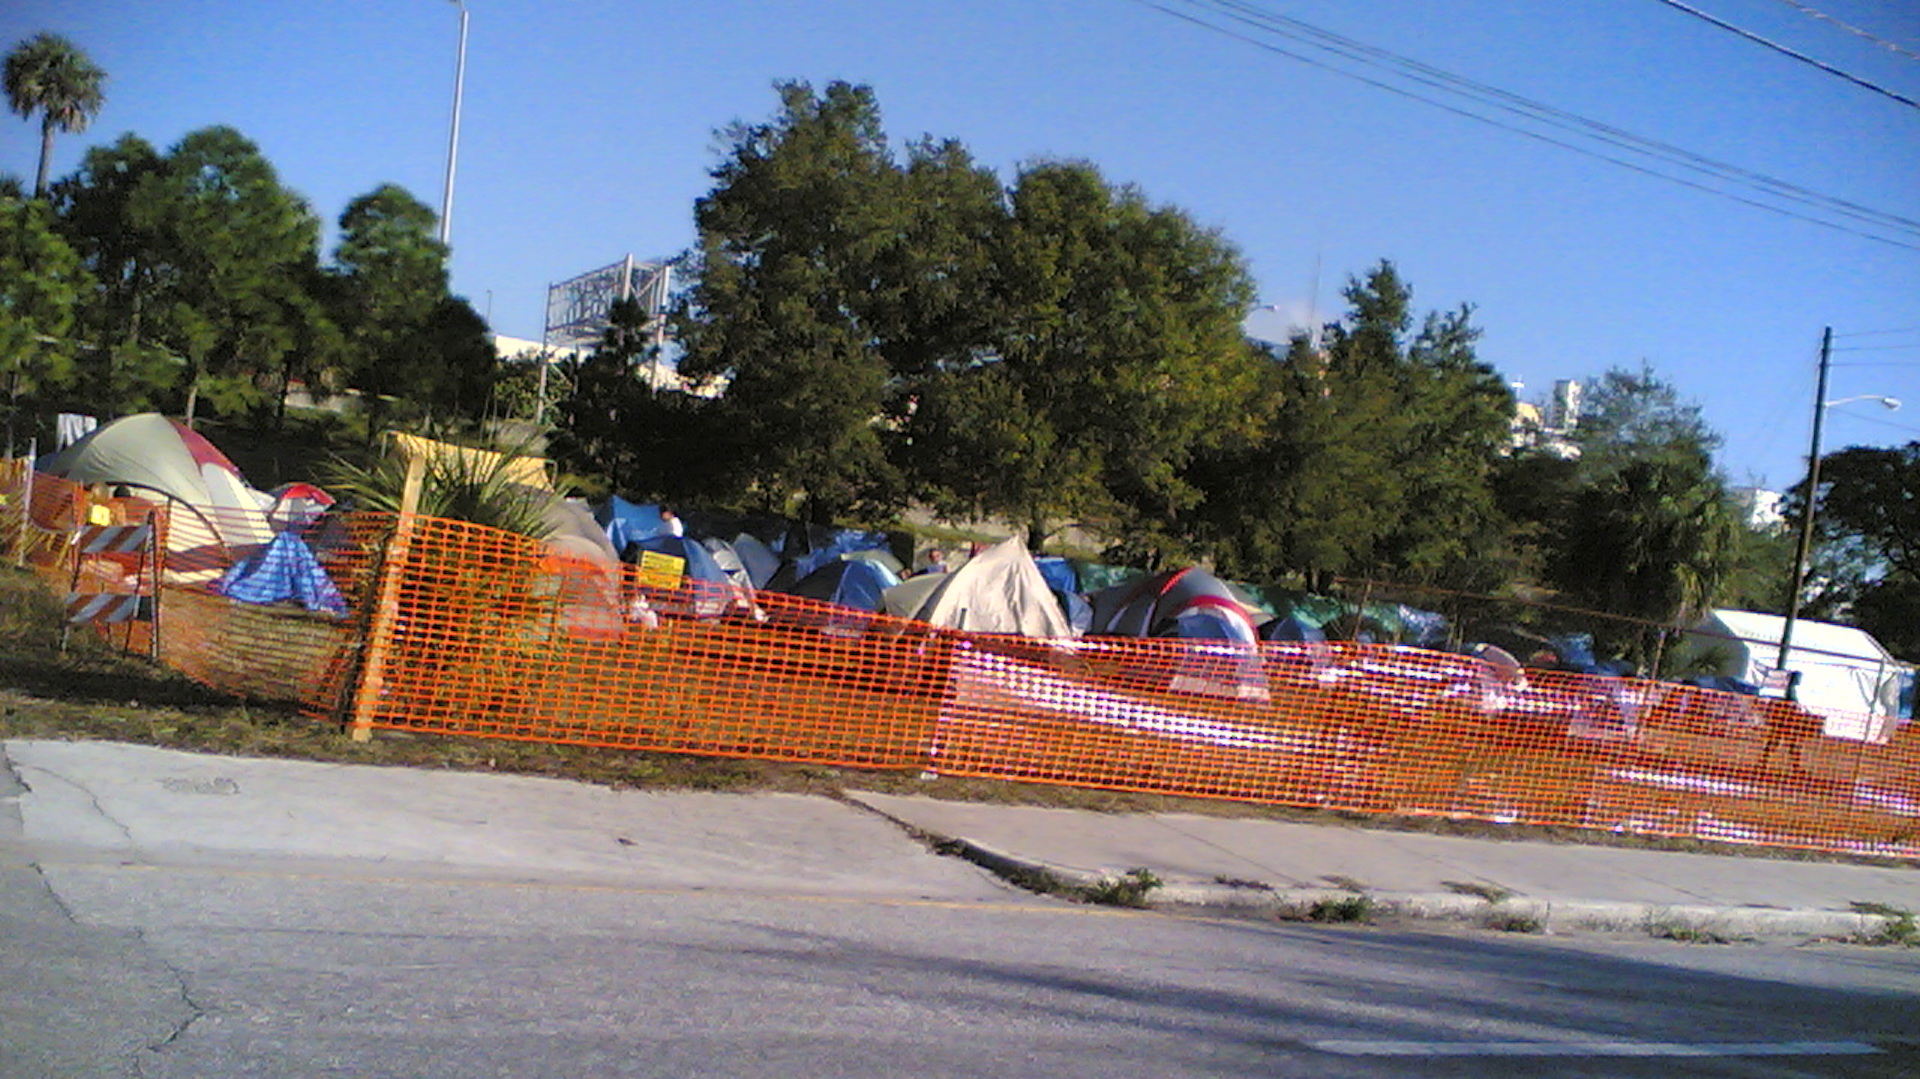 "Camp homeless" in the US